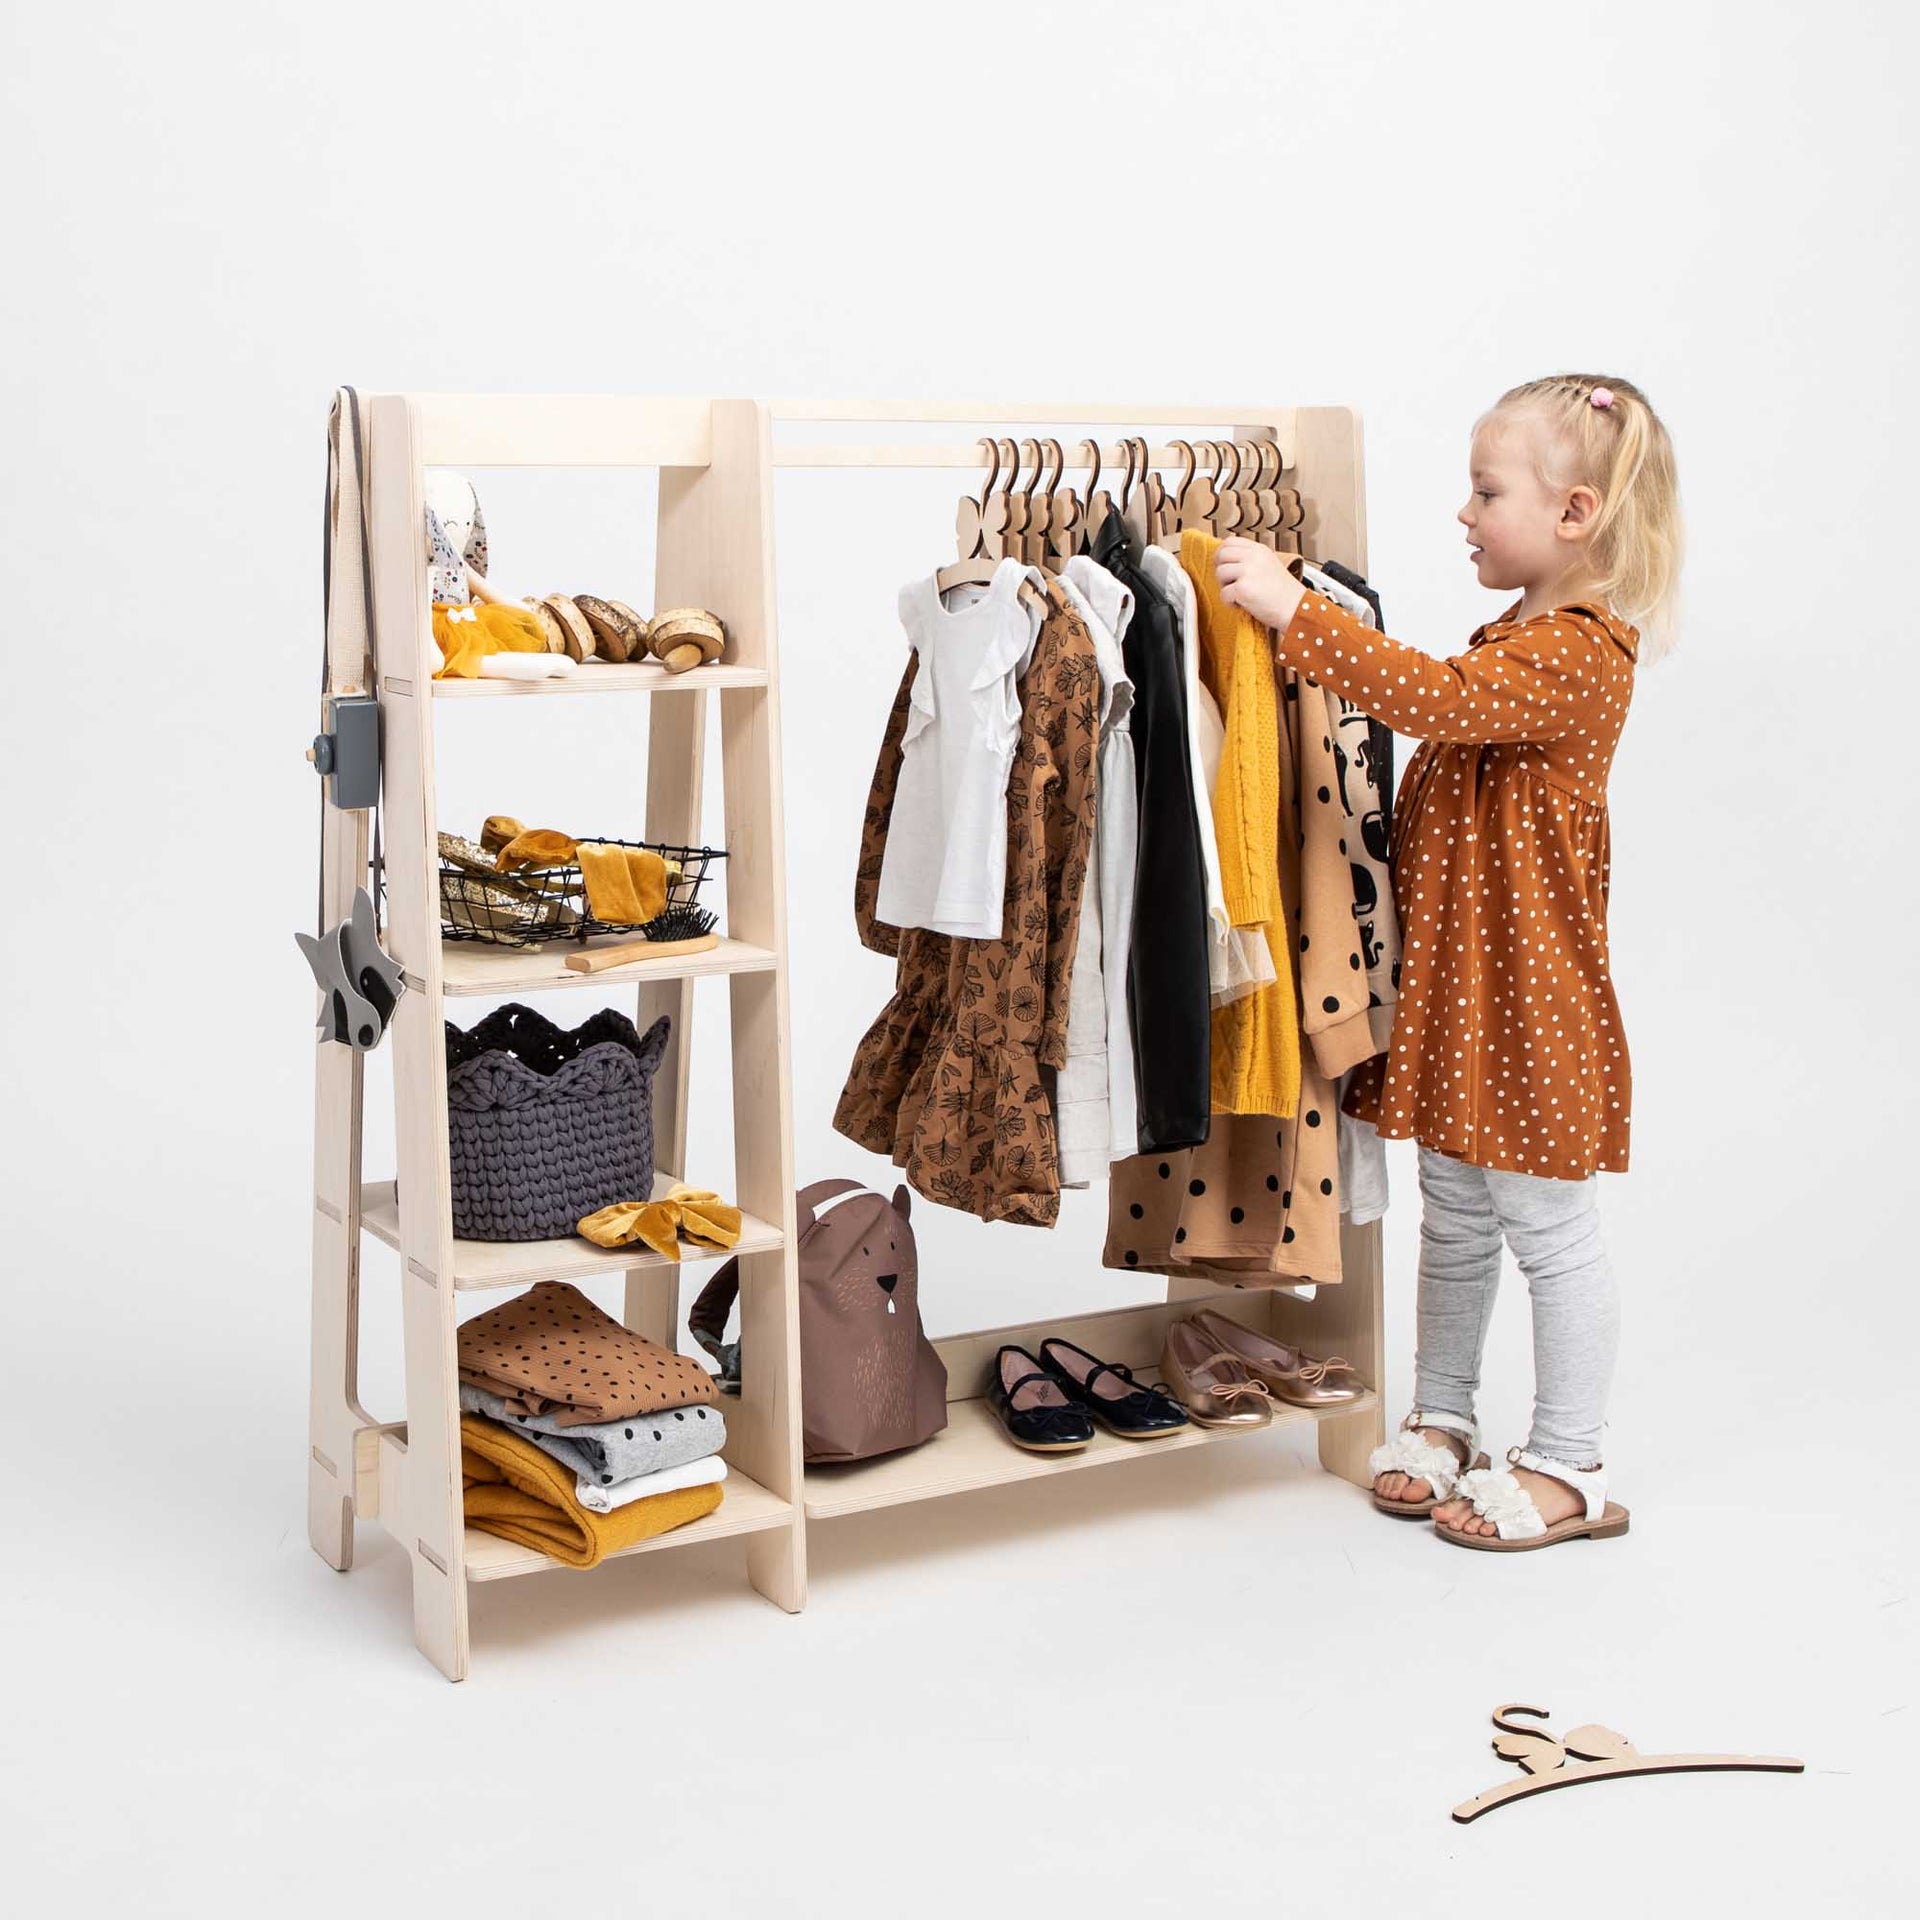 Coat Hanger Apparel Hangers Display Stand Small Kids Clothes